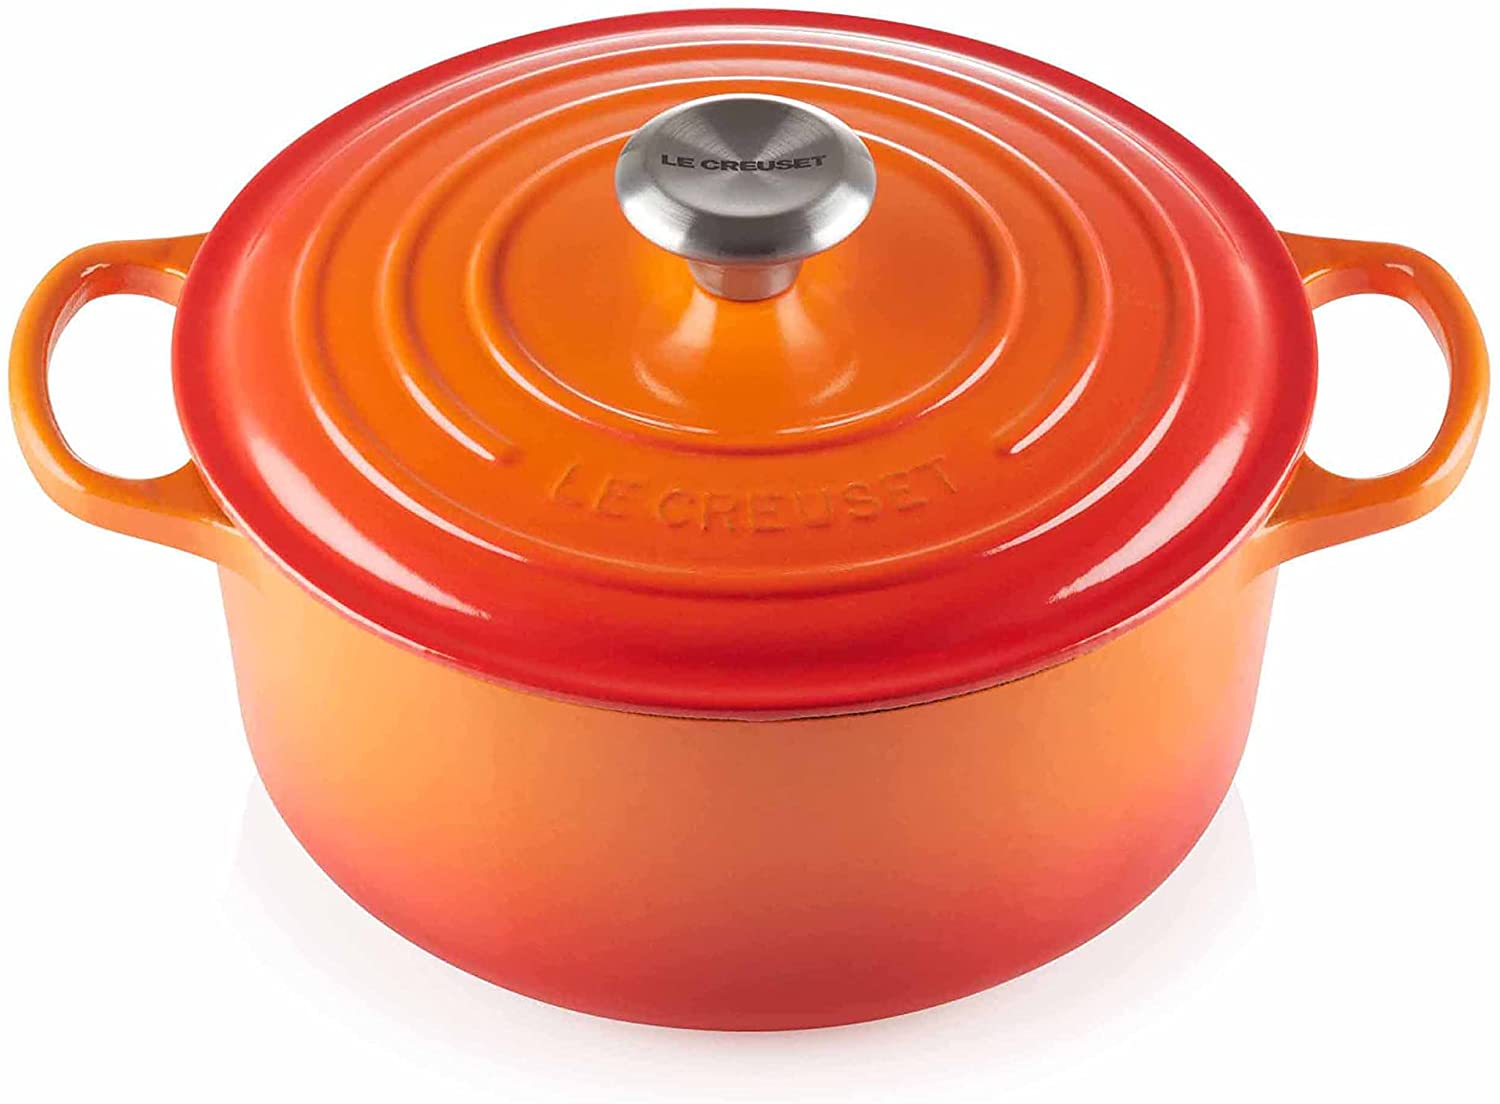 5.5-Qt Le Creuset Enameled Cast Iron Signature Round Dutch Oven (Flame) $230 + Free Shipping